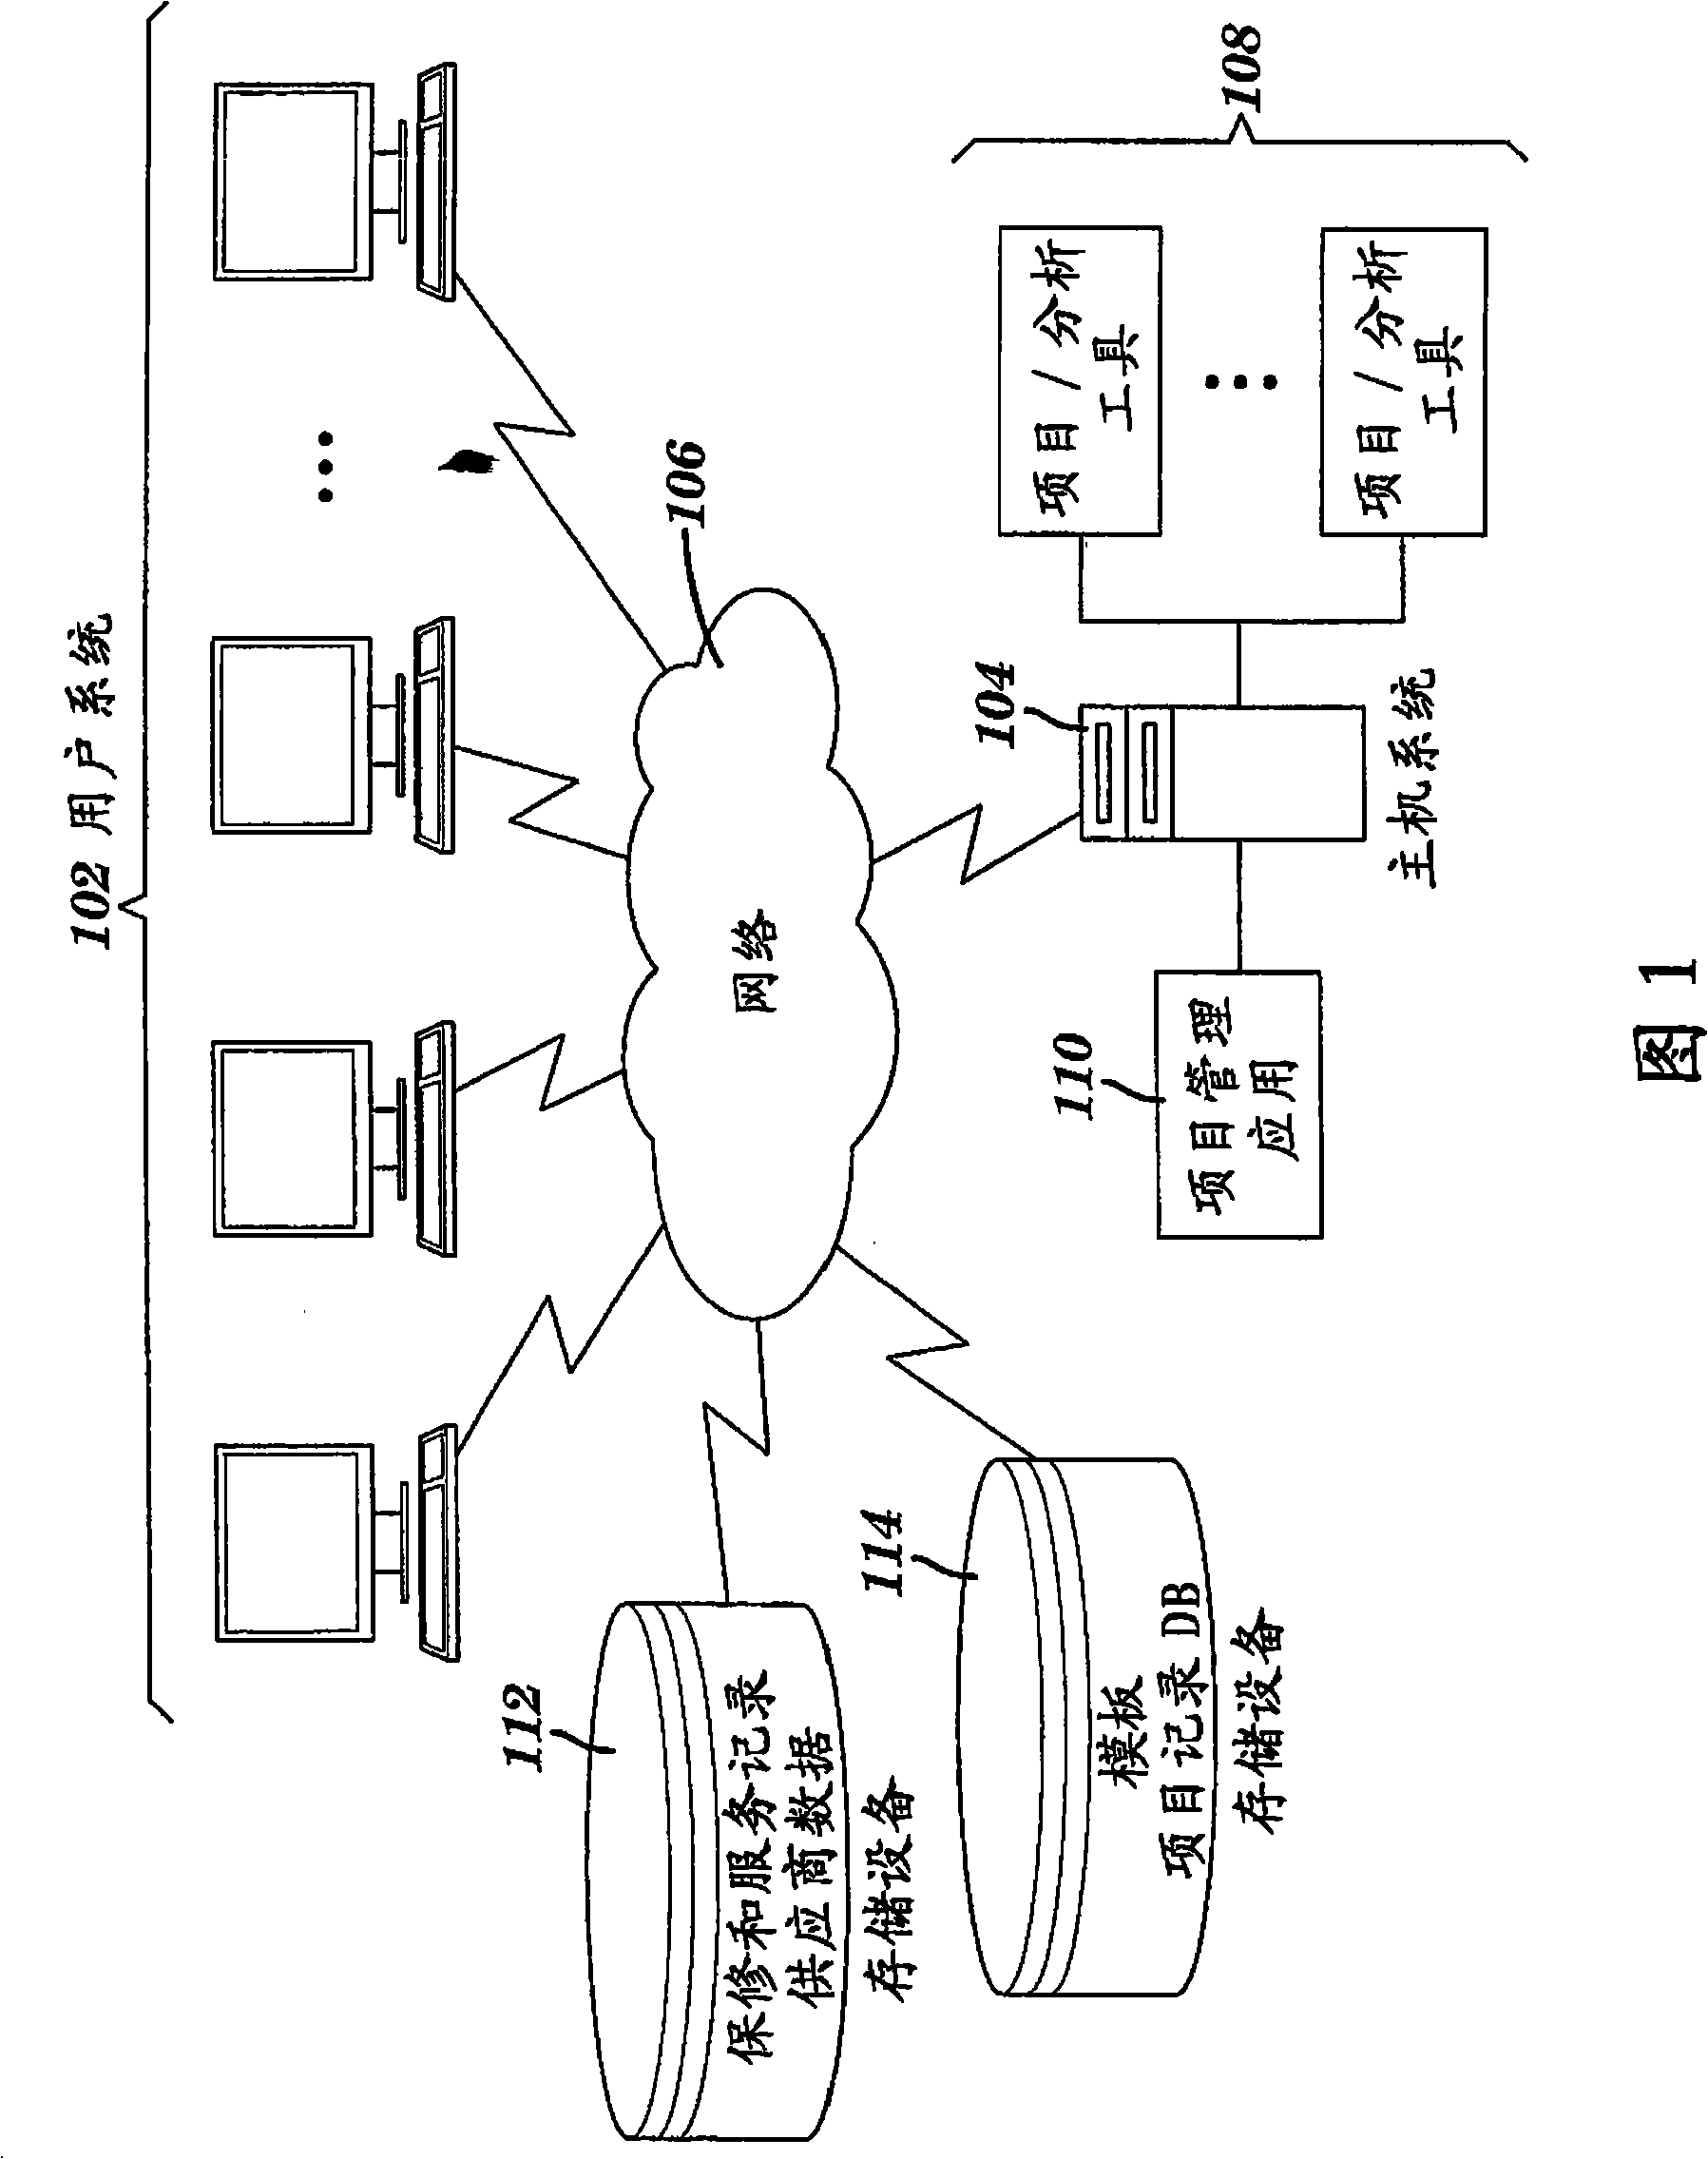 Methods and systems for implementing an end-to-end project management system